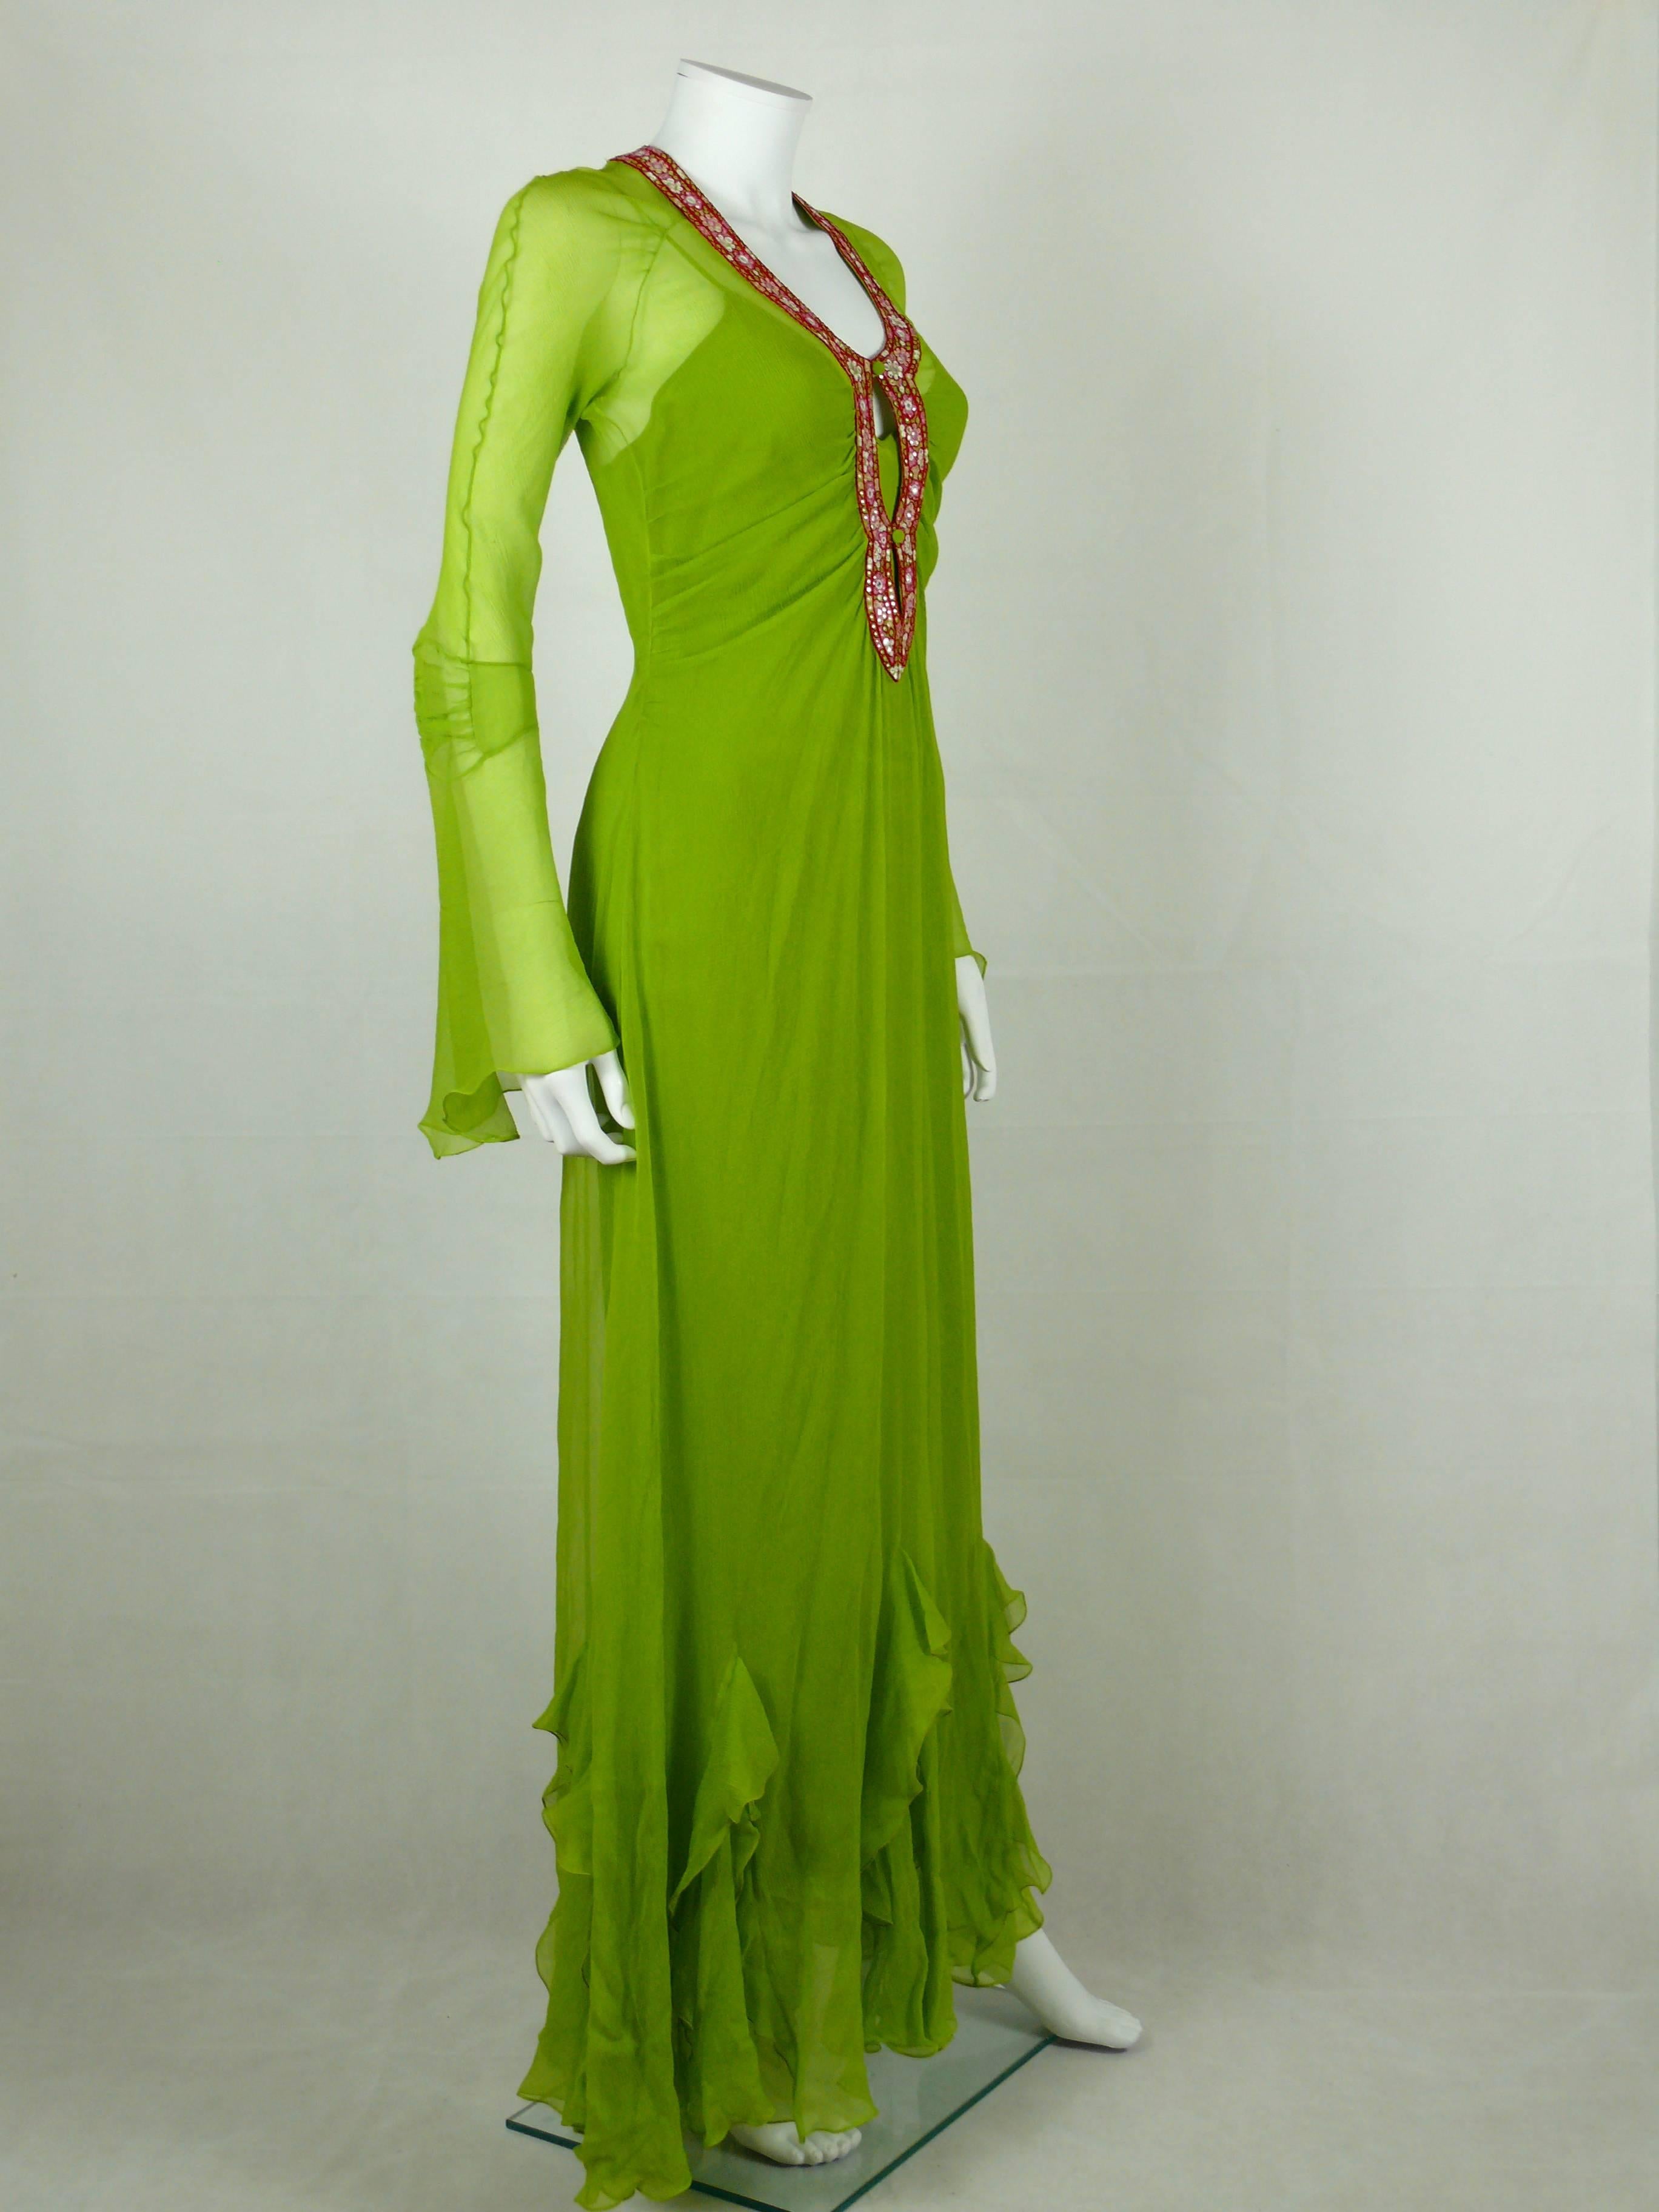 Christian Dior Ruffled Chiffon Dress In Good Condition For Sale In Nice, FR